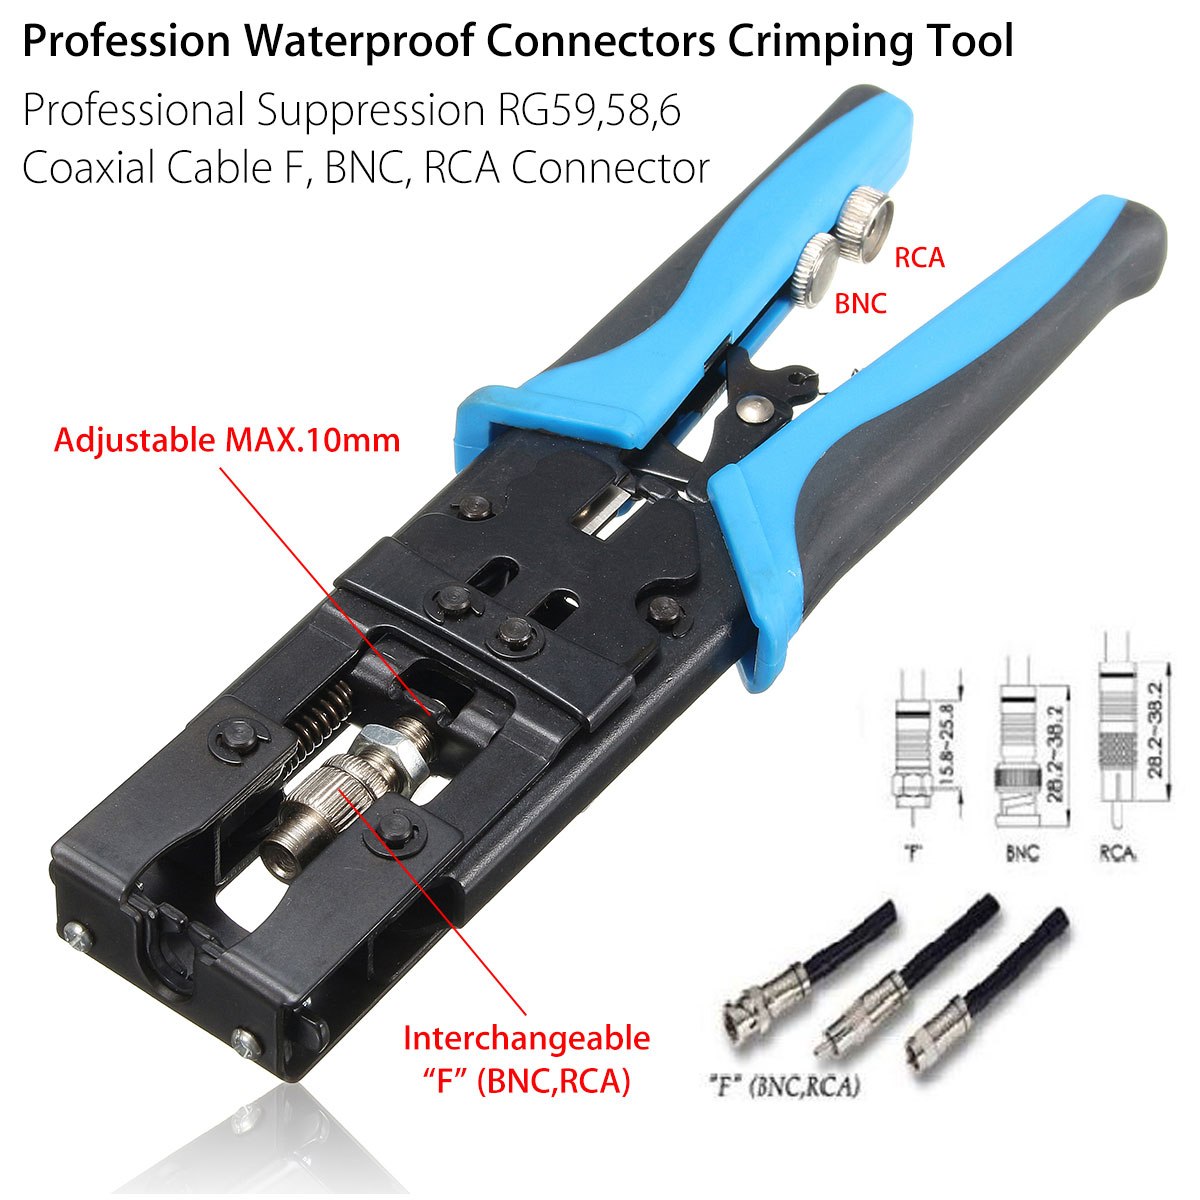 For Compression RG-59 RG-6. Coaxial Cable Waterproof Connectors Crimping Tool 